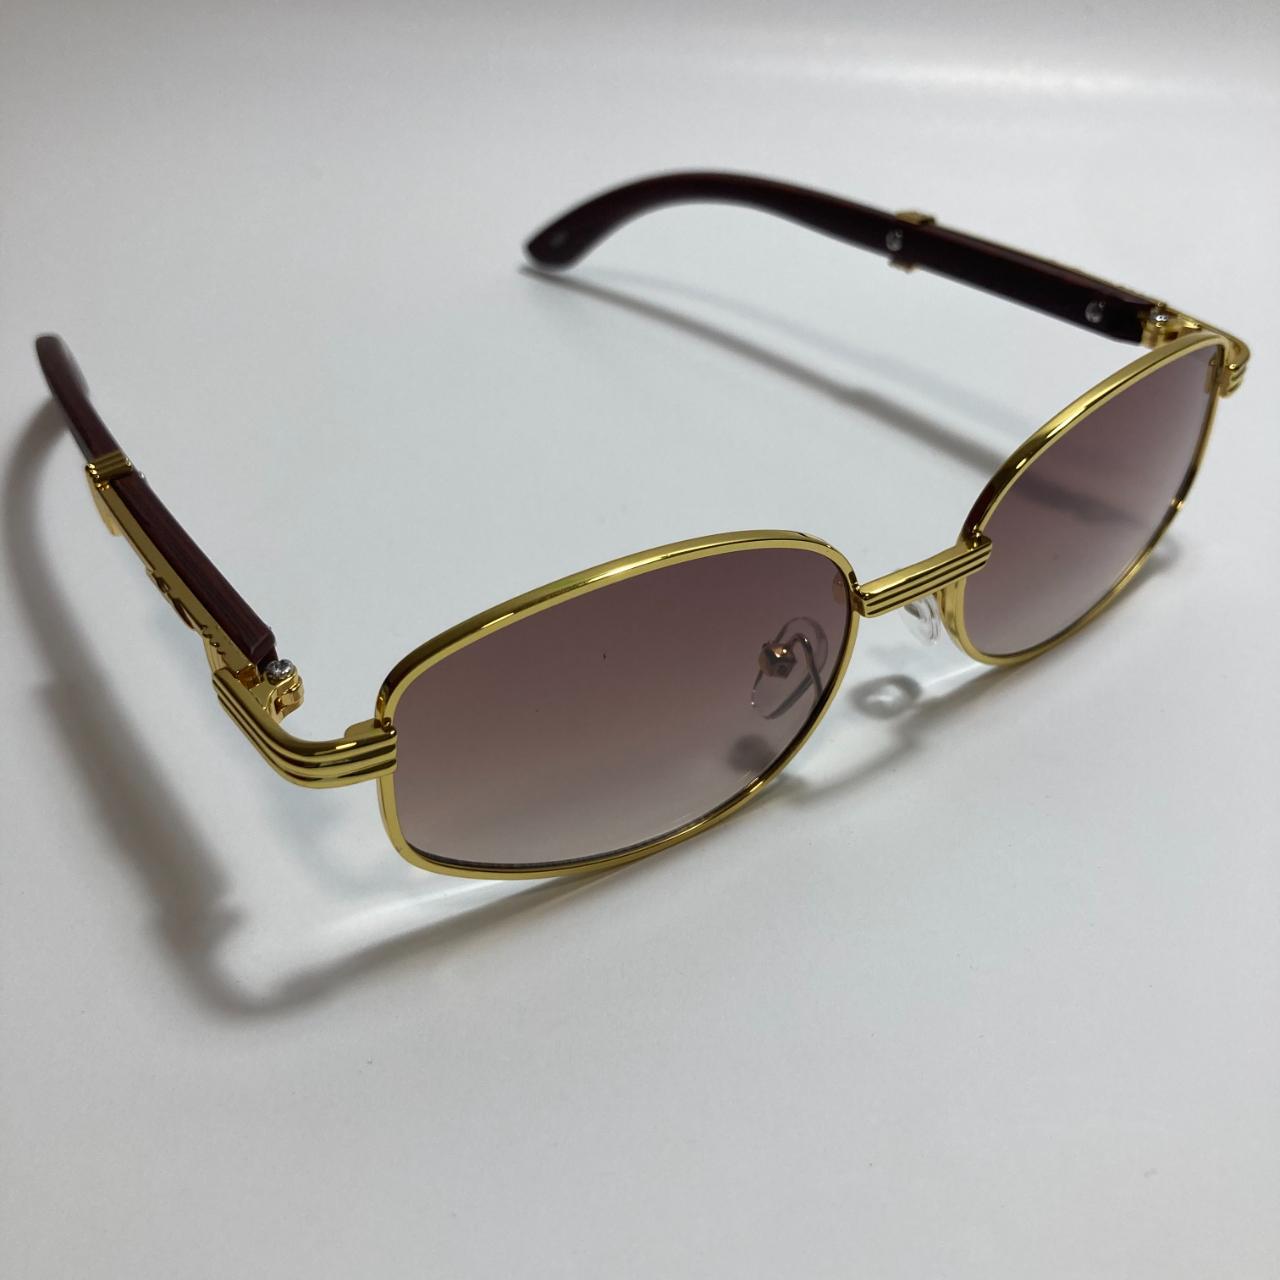 Men's Gold and Brown Sunglasses (3)